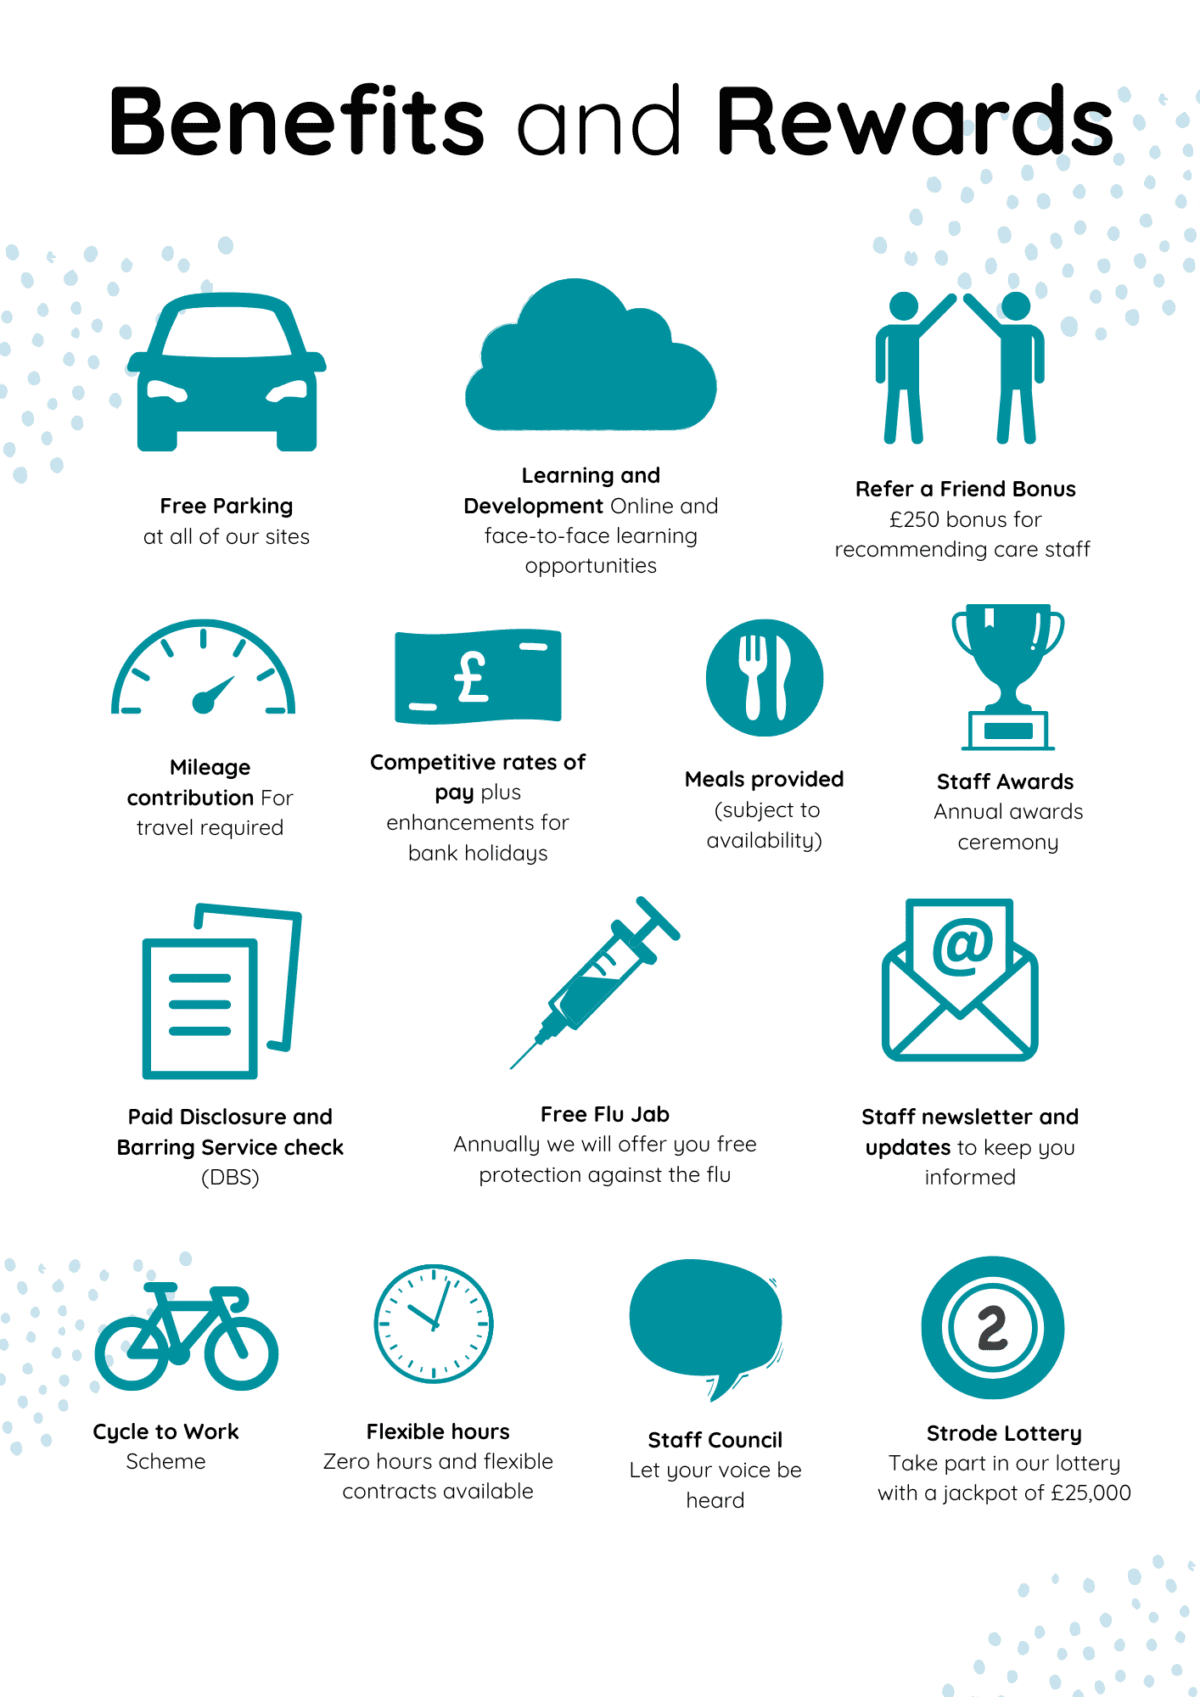 Rewards and Benefits poster